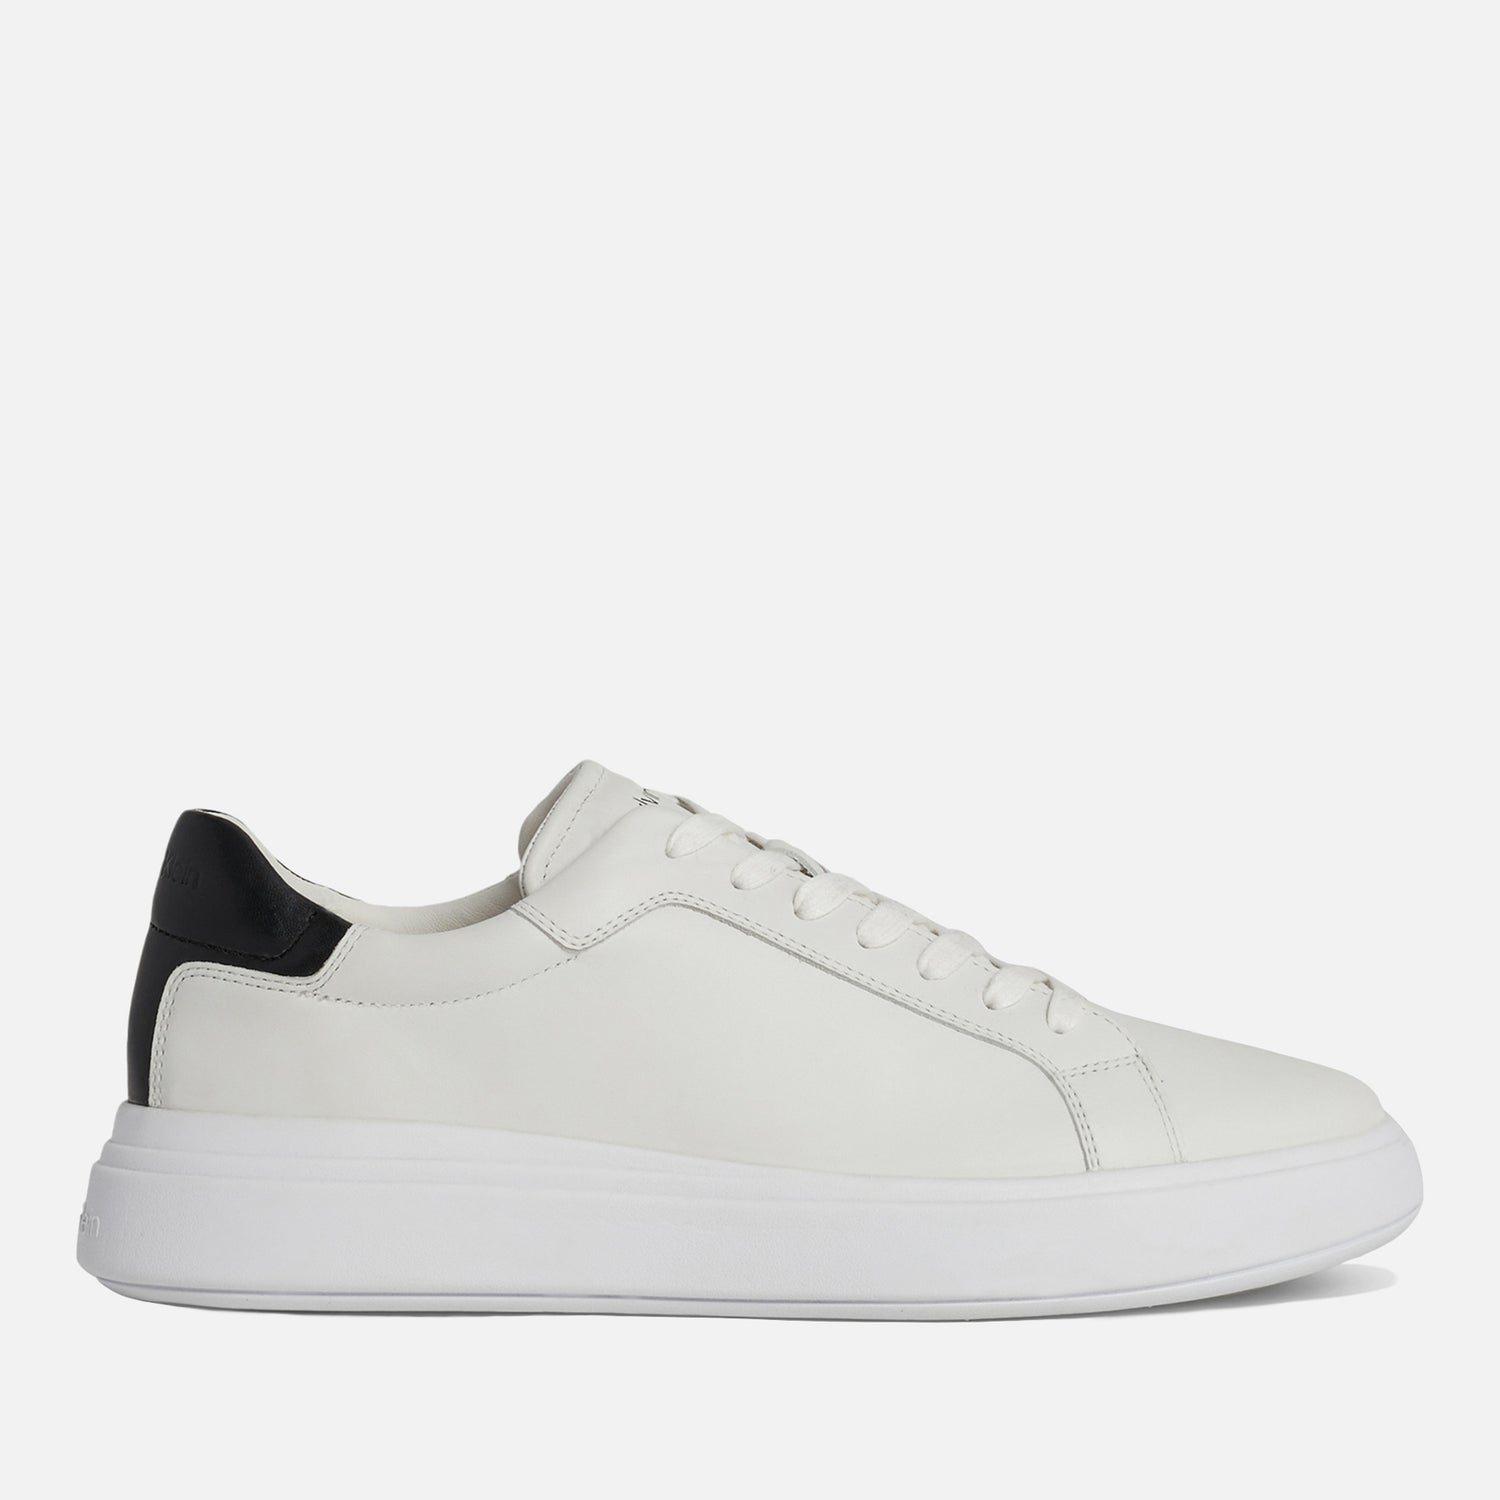 Calvin Klein Men's Leather Chunky Sole Trainers - UK 8